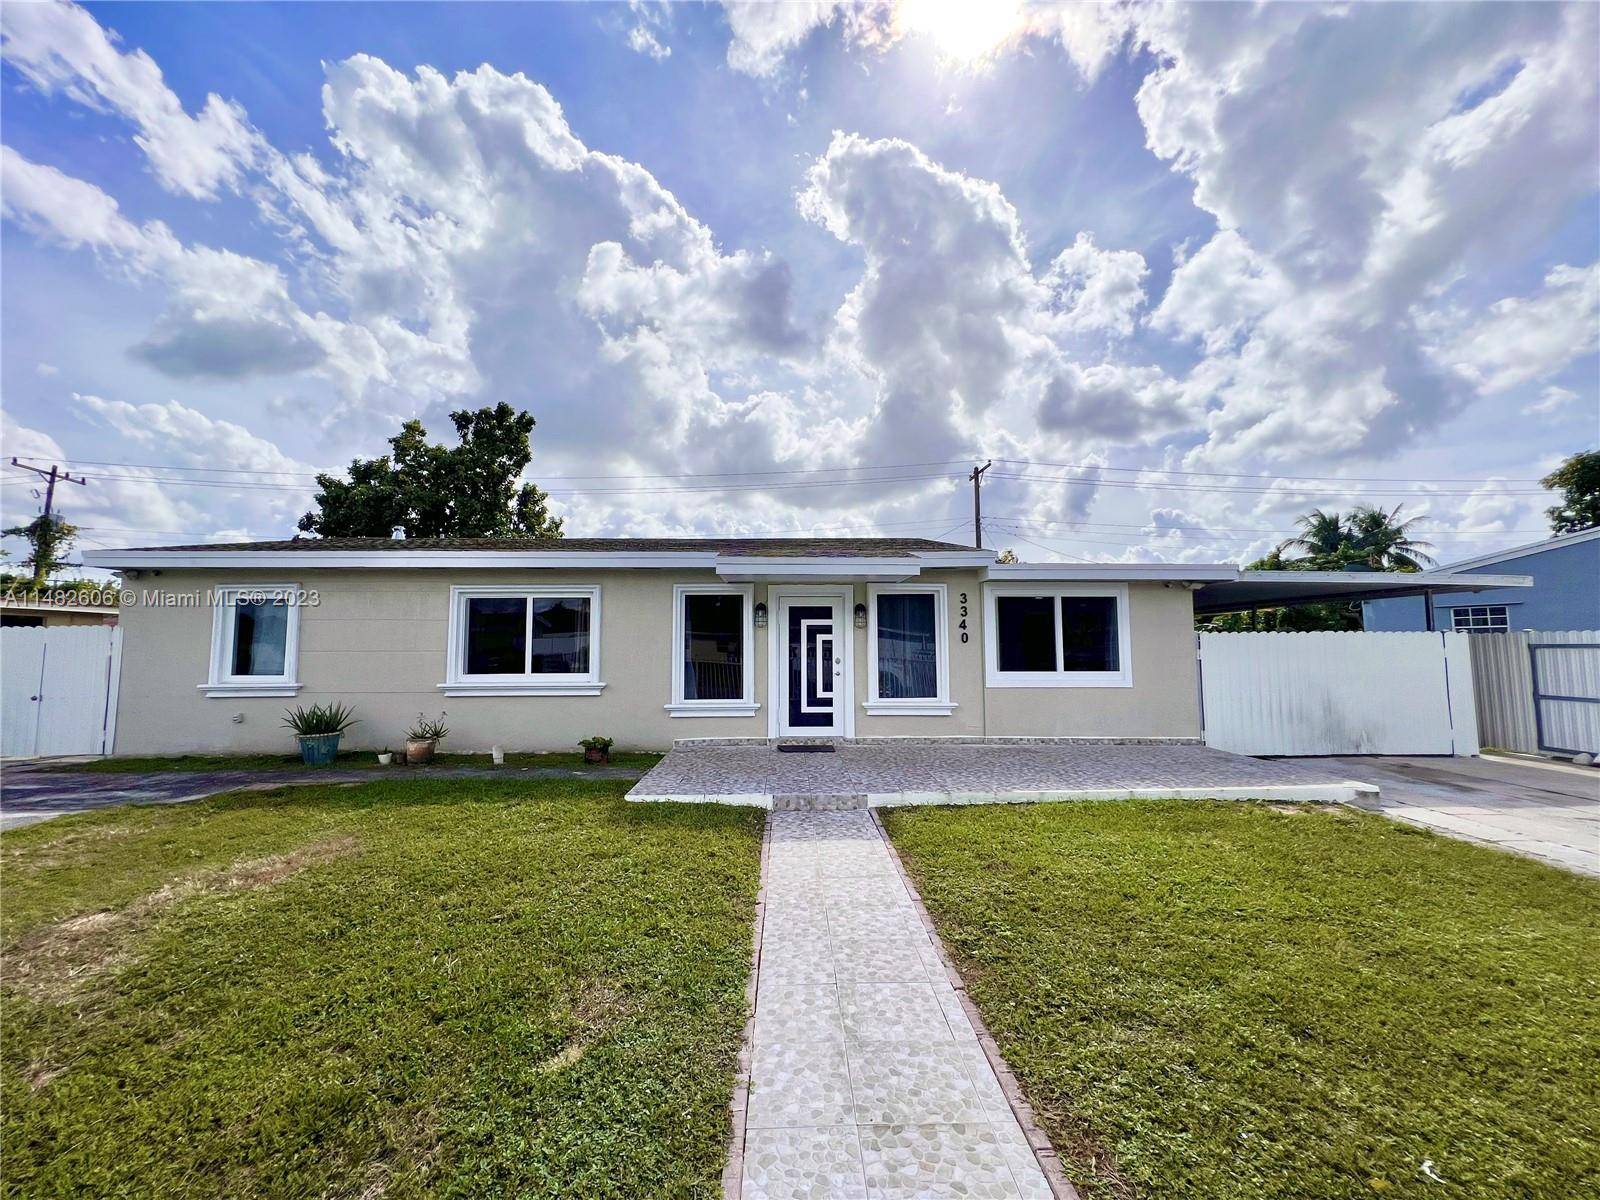 Beautiful single family home completely remodeled 5 bedrooms and 4 bathrooms property.